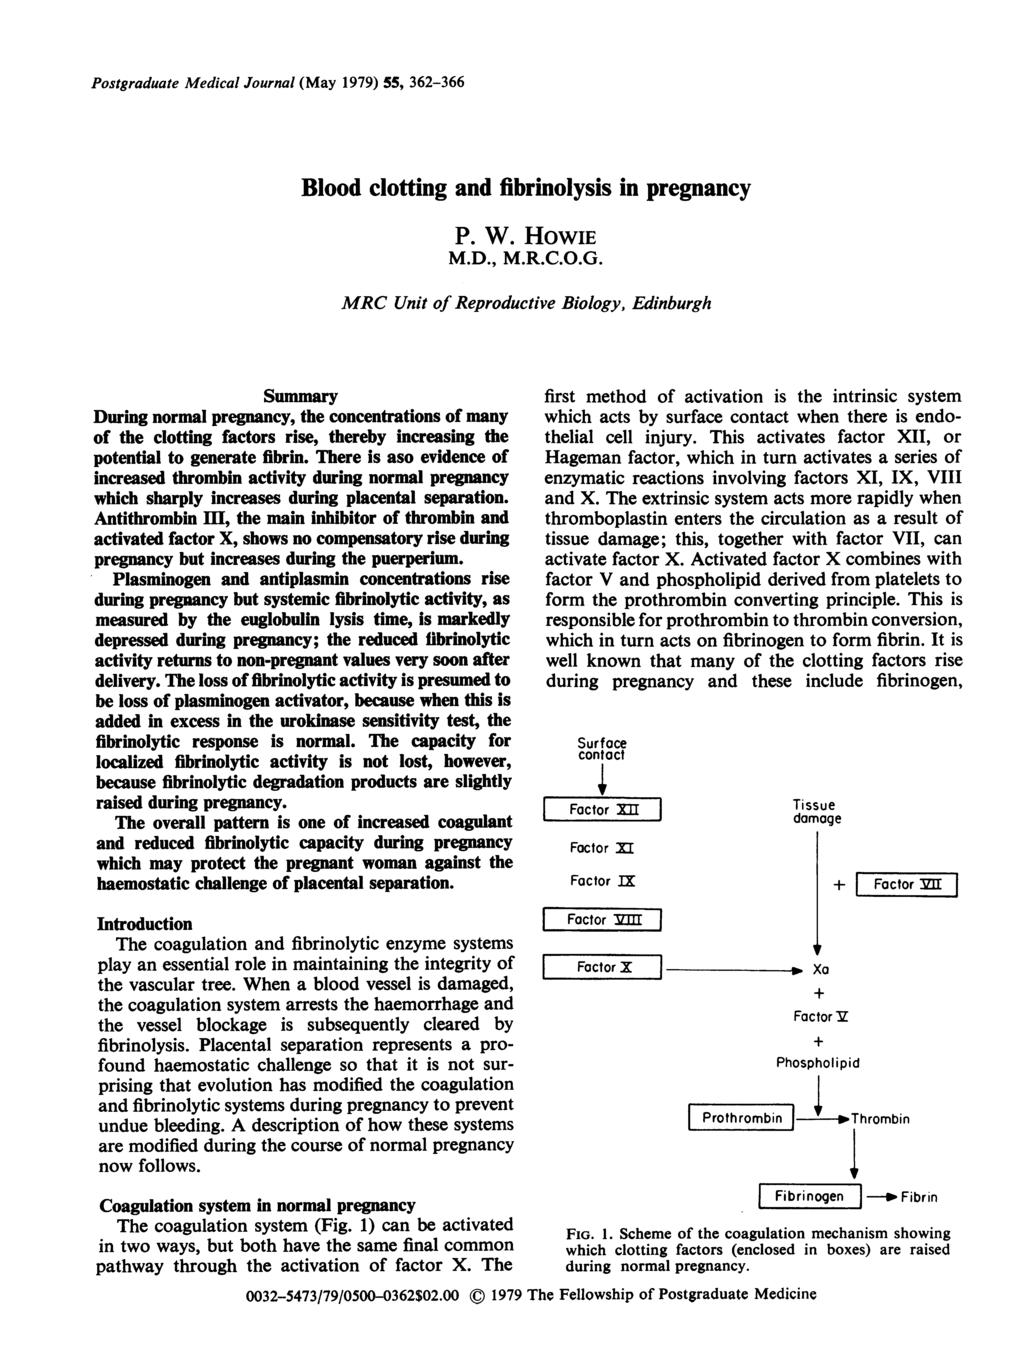 Postgraduate Medical Journal (May 1979) 55, 362-366 Blood clotting and fibrinolysis in pregnancy P. W. HOWIE M.D., M.R.C.O.G.